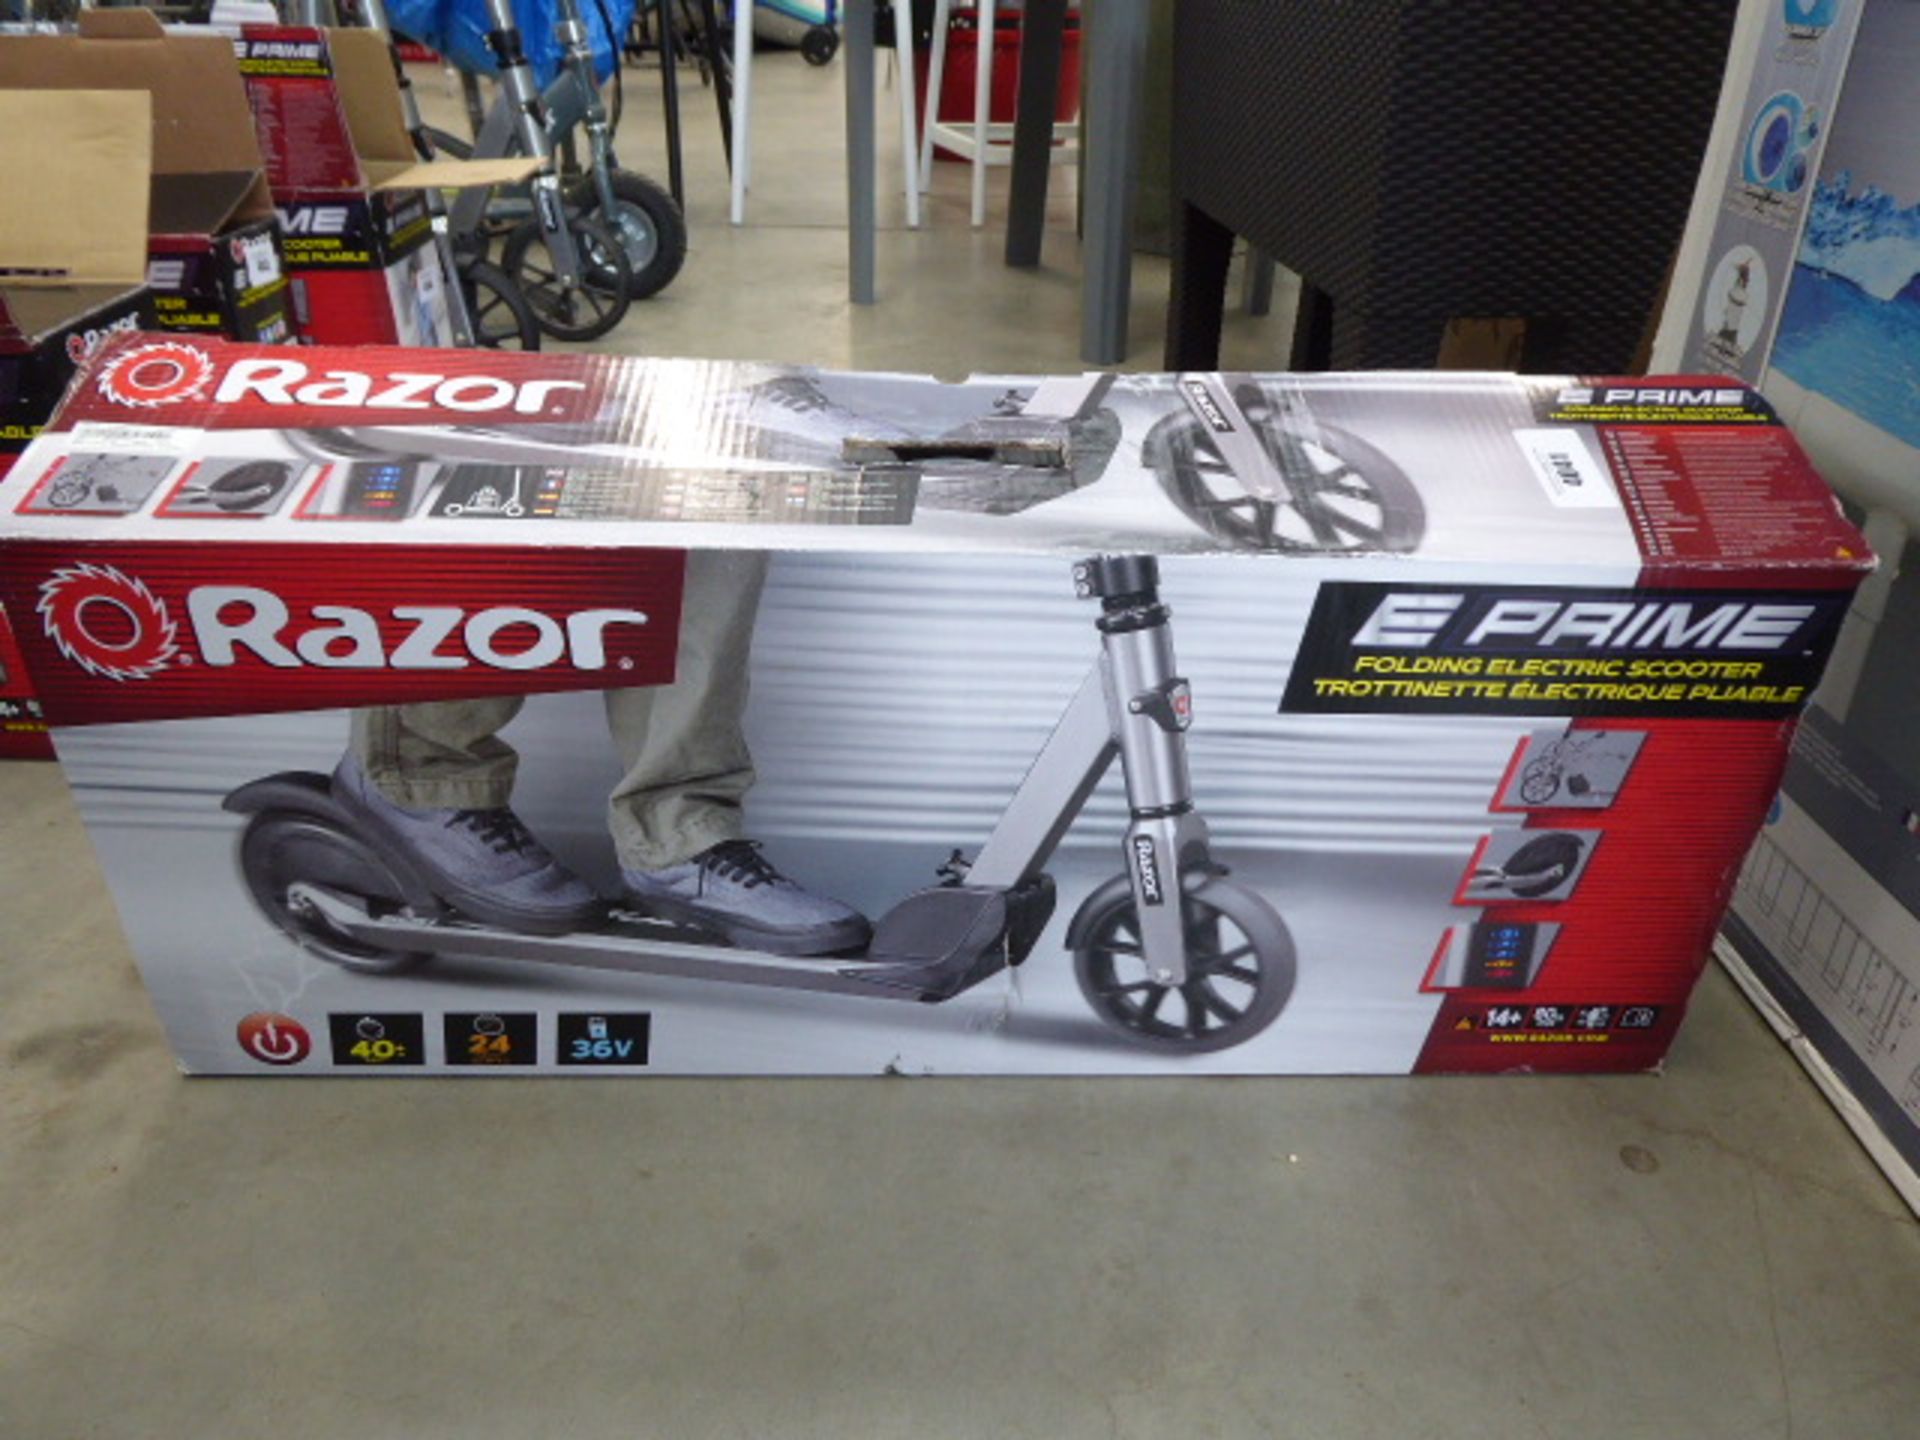 Razor boxed electric scooter with charger